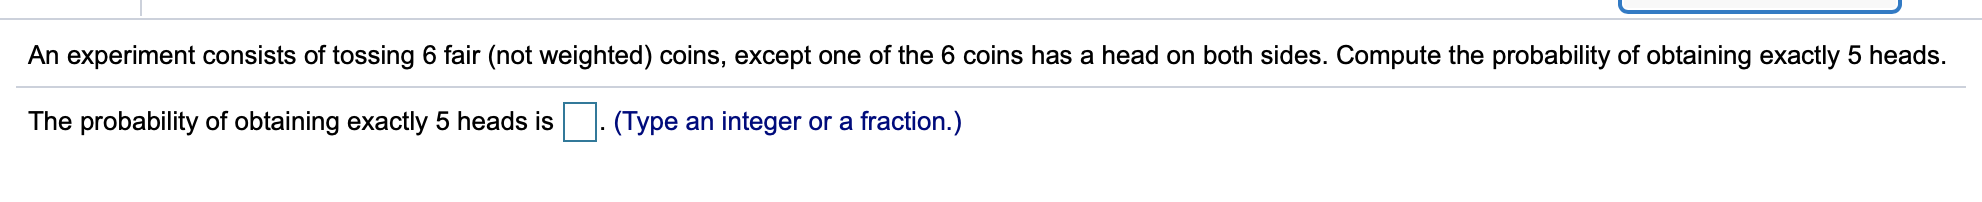 An experiment consists of tossing 6 fair (not weighted) coins, except one of the 6 coins has a head on both sides. Compute the probability of obtaining exactly 5 heads
The probability of obtaining exactly 5 heads is
(Type an integer or a fraction.)
